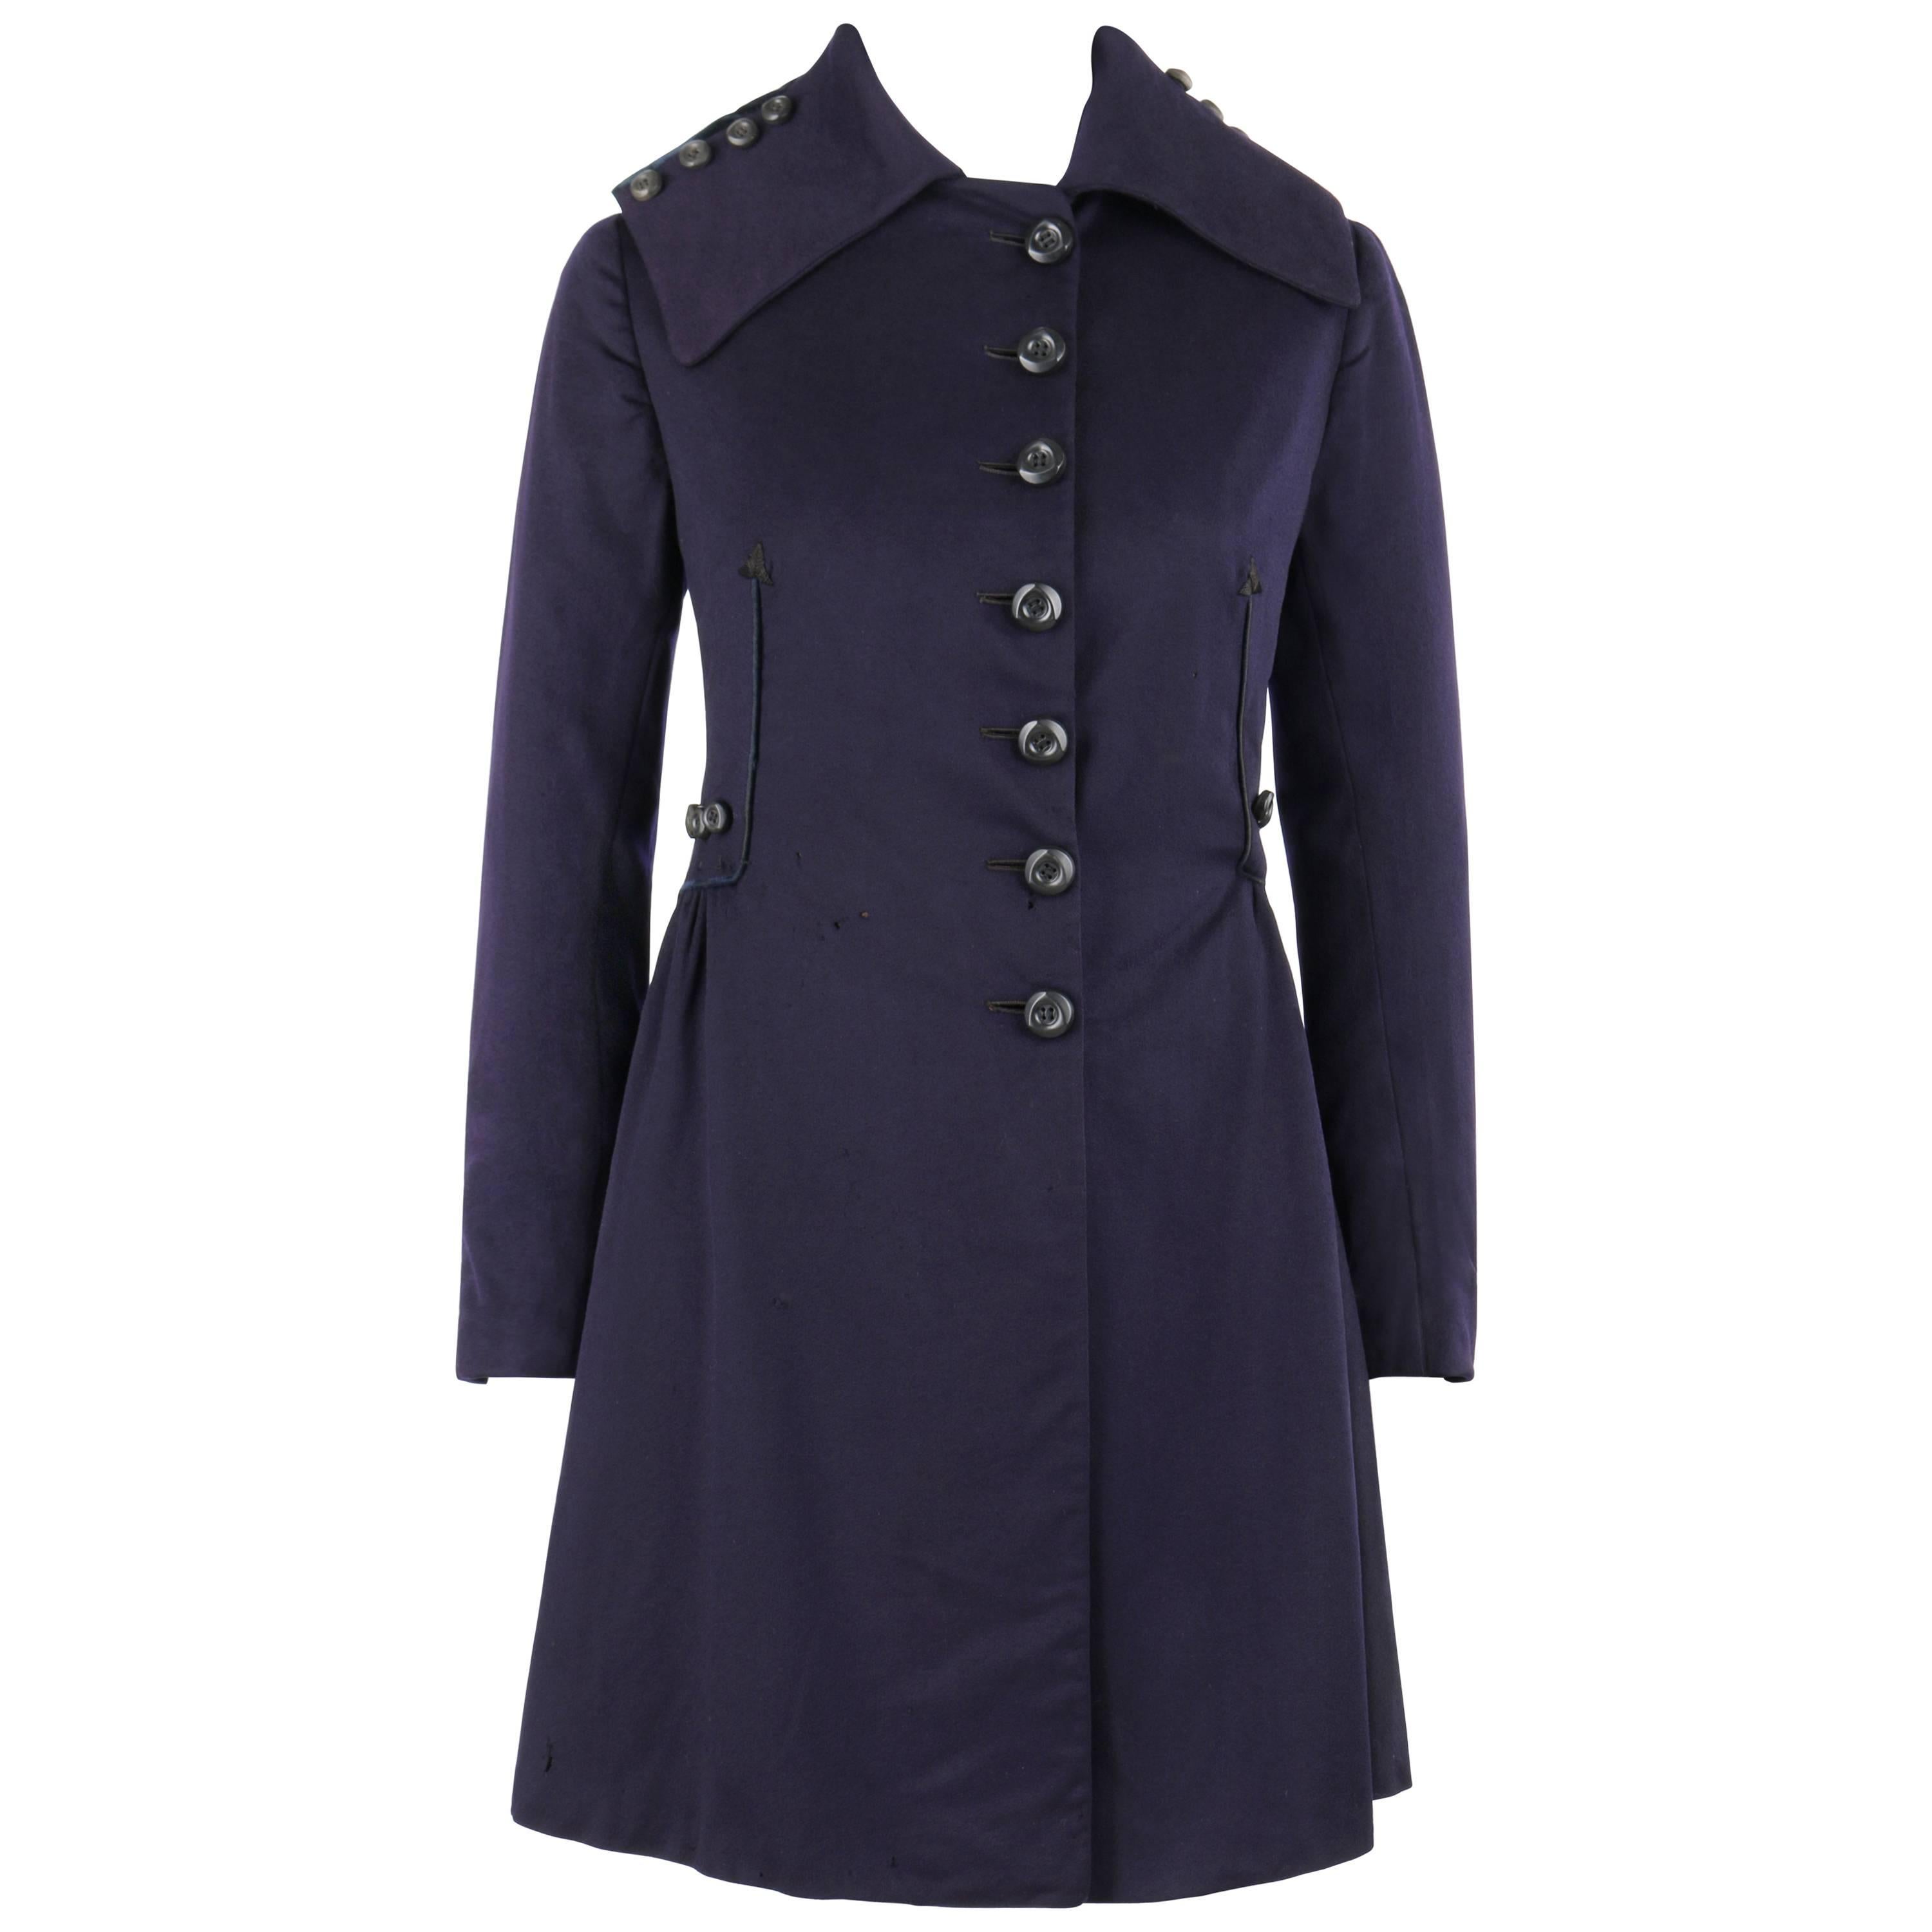 COUTURE c.1910's Edwardian WWI Navy Blue Wool Military Walking Coat